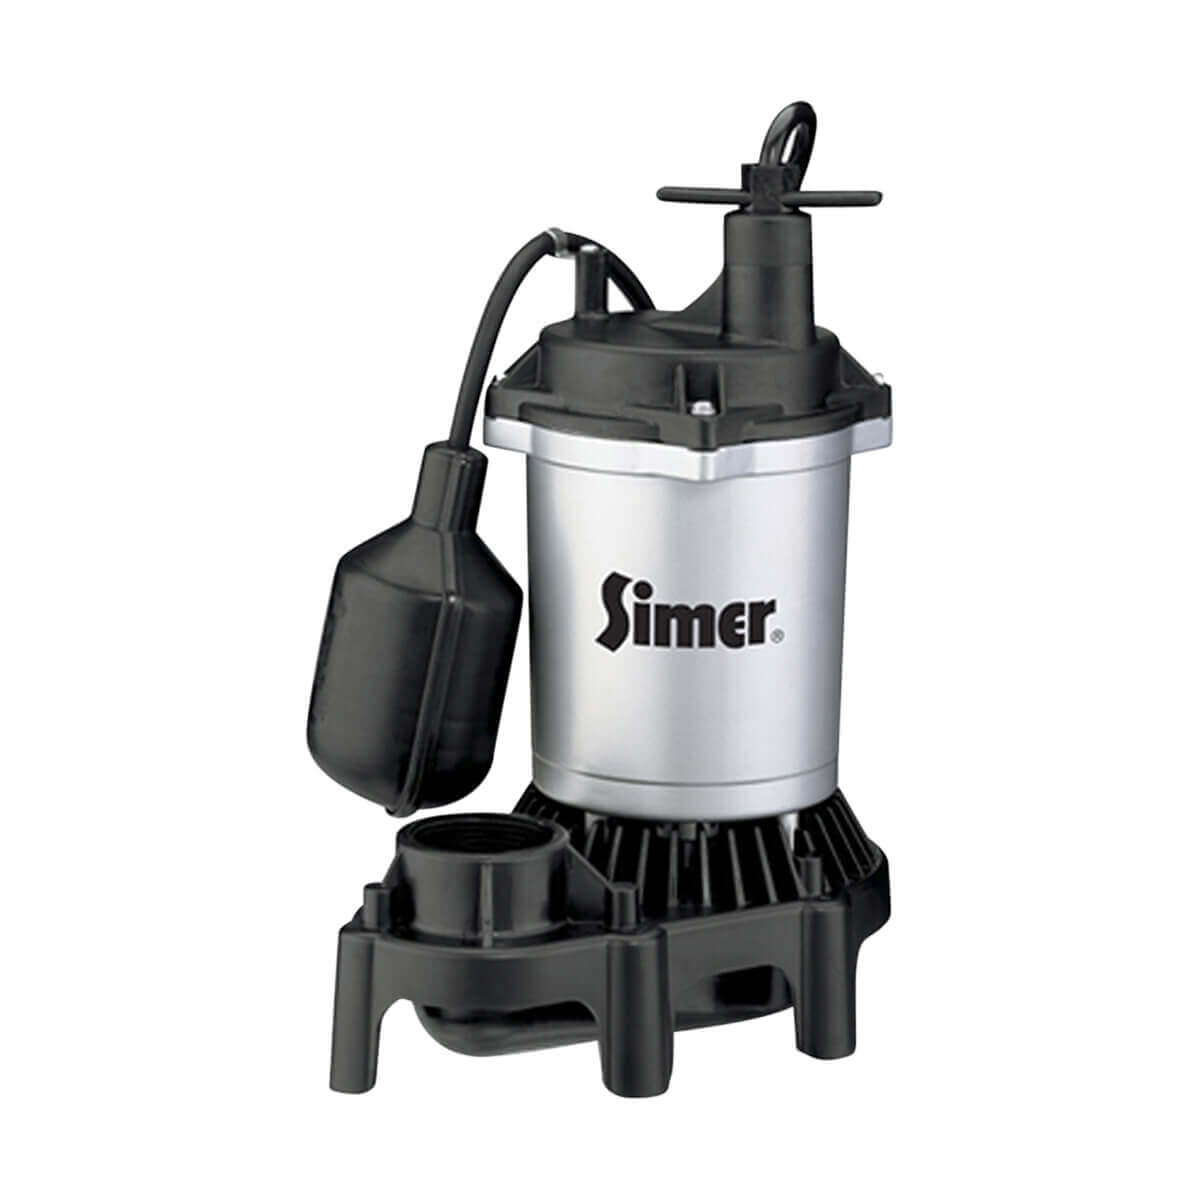 Submersible Thermoplastic Sump Pump 1/3 HP - Tethered Switch - 2163